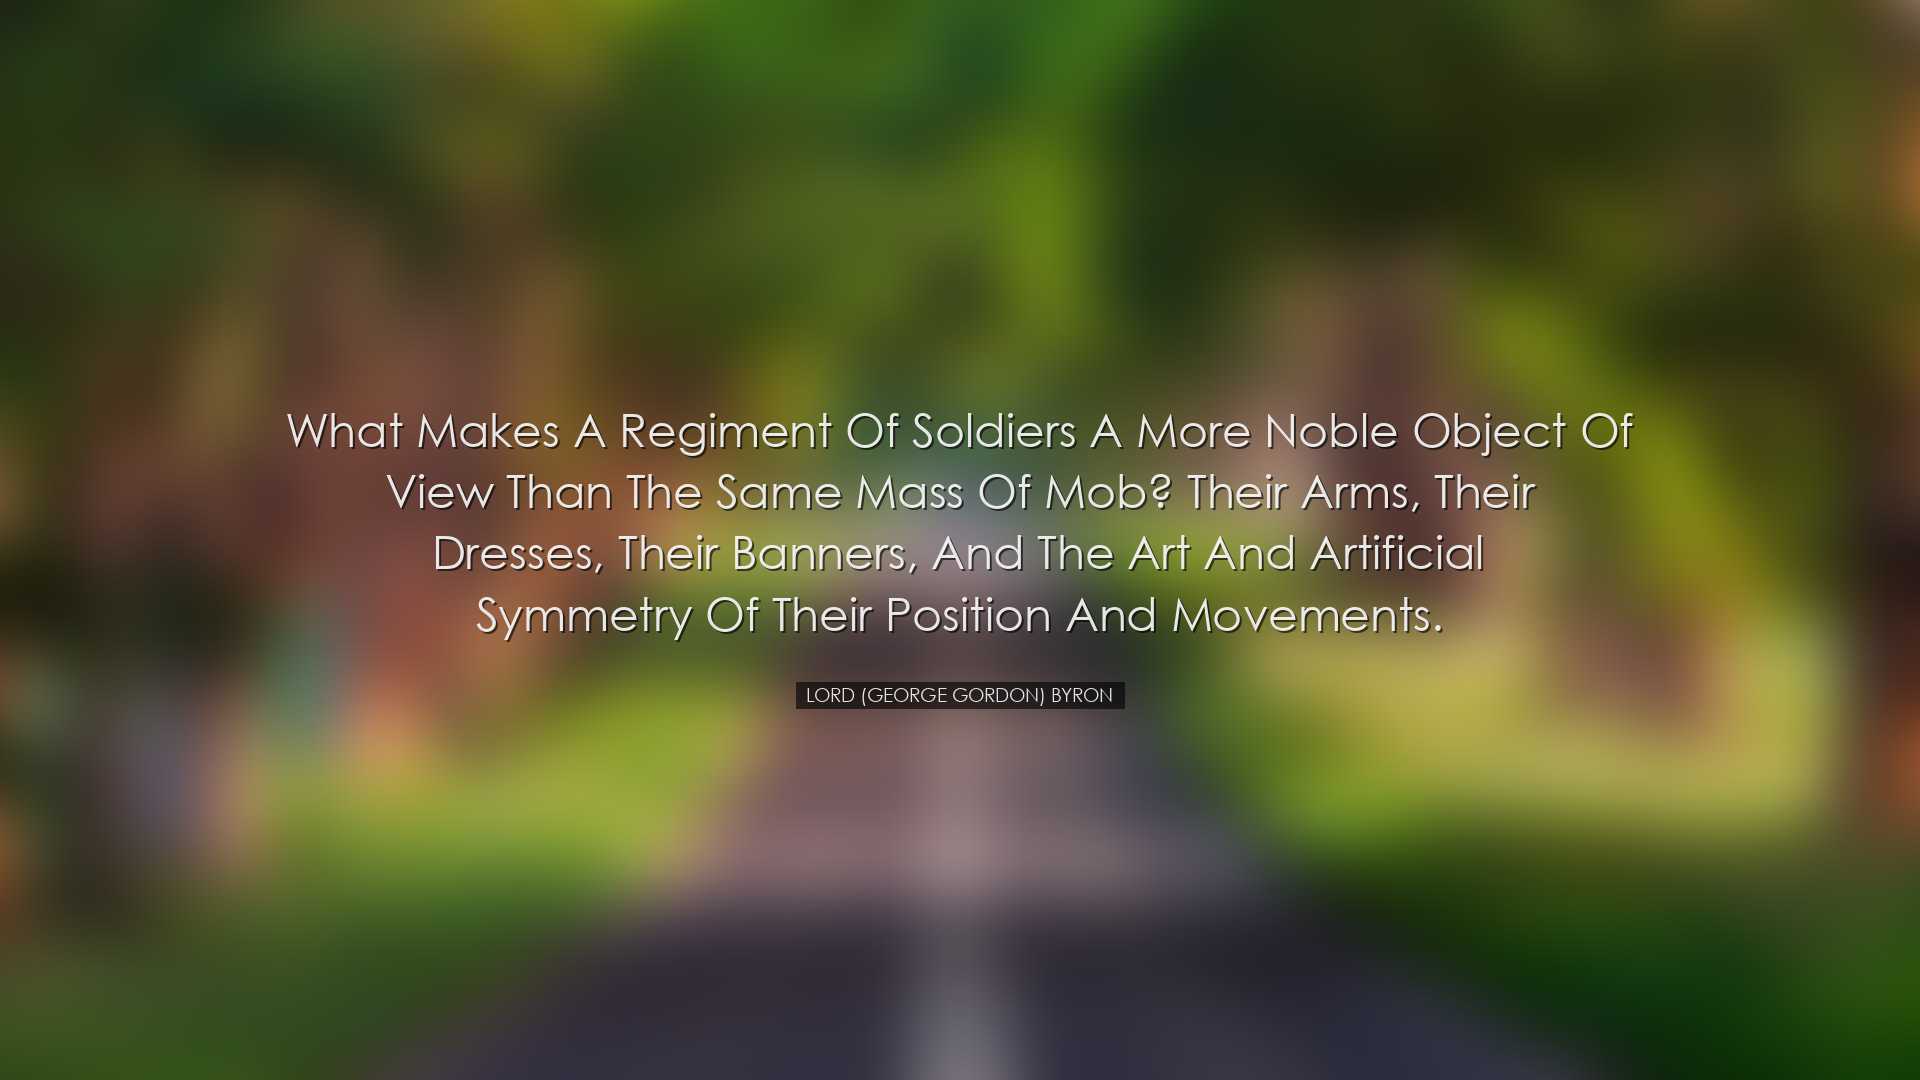 What makes a regiment of soldiers a more noble object of view than